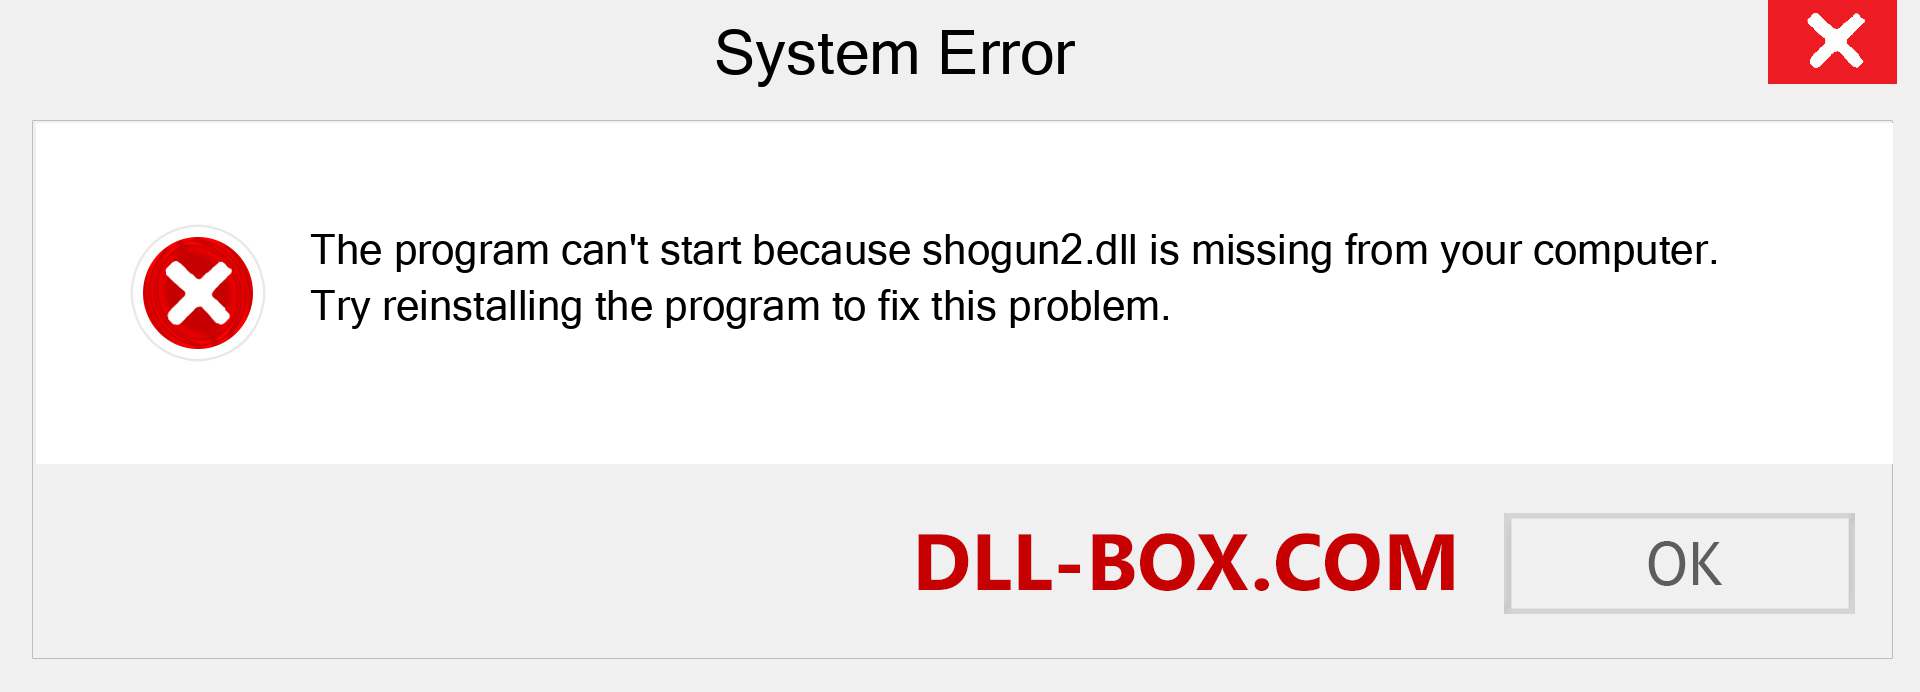  shogun2.dll file is missing?. Download for Windows 7, 8, 10 - Fix  shogun2 dll Missing Error on Windows, photos, images